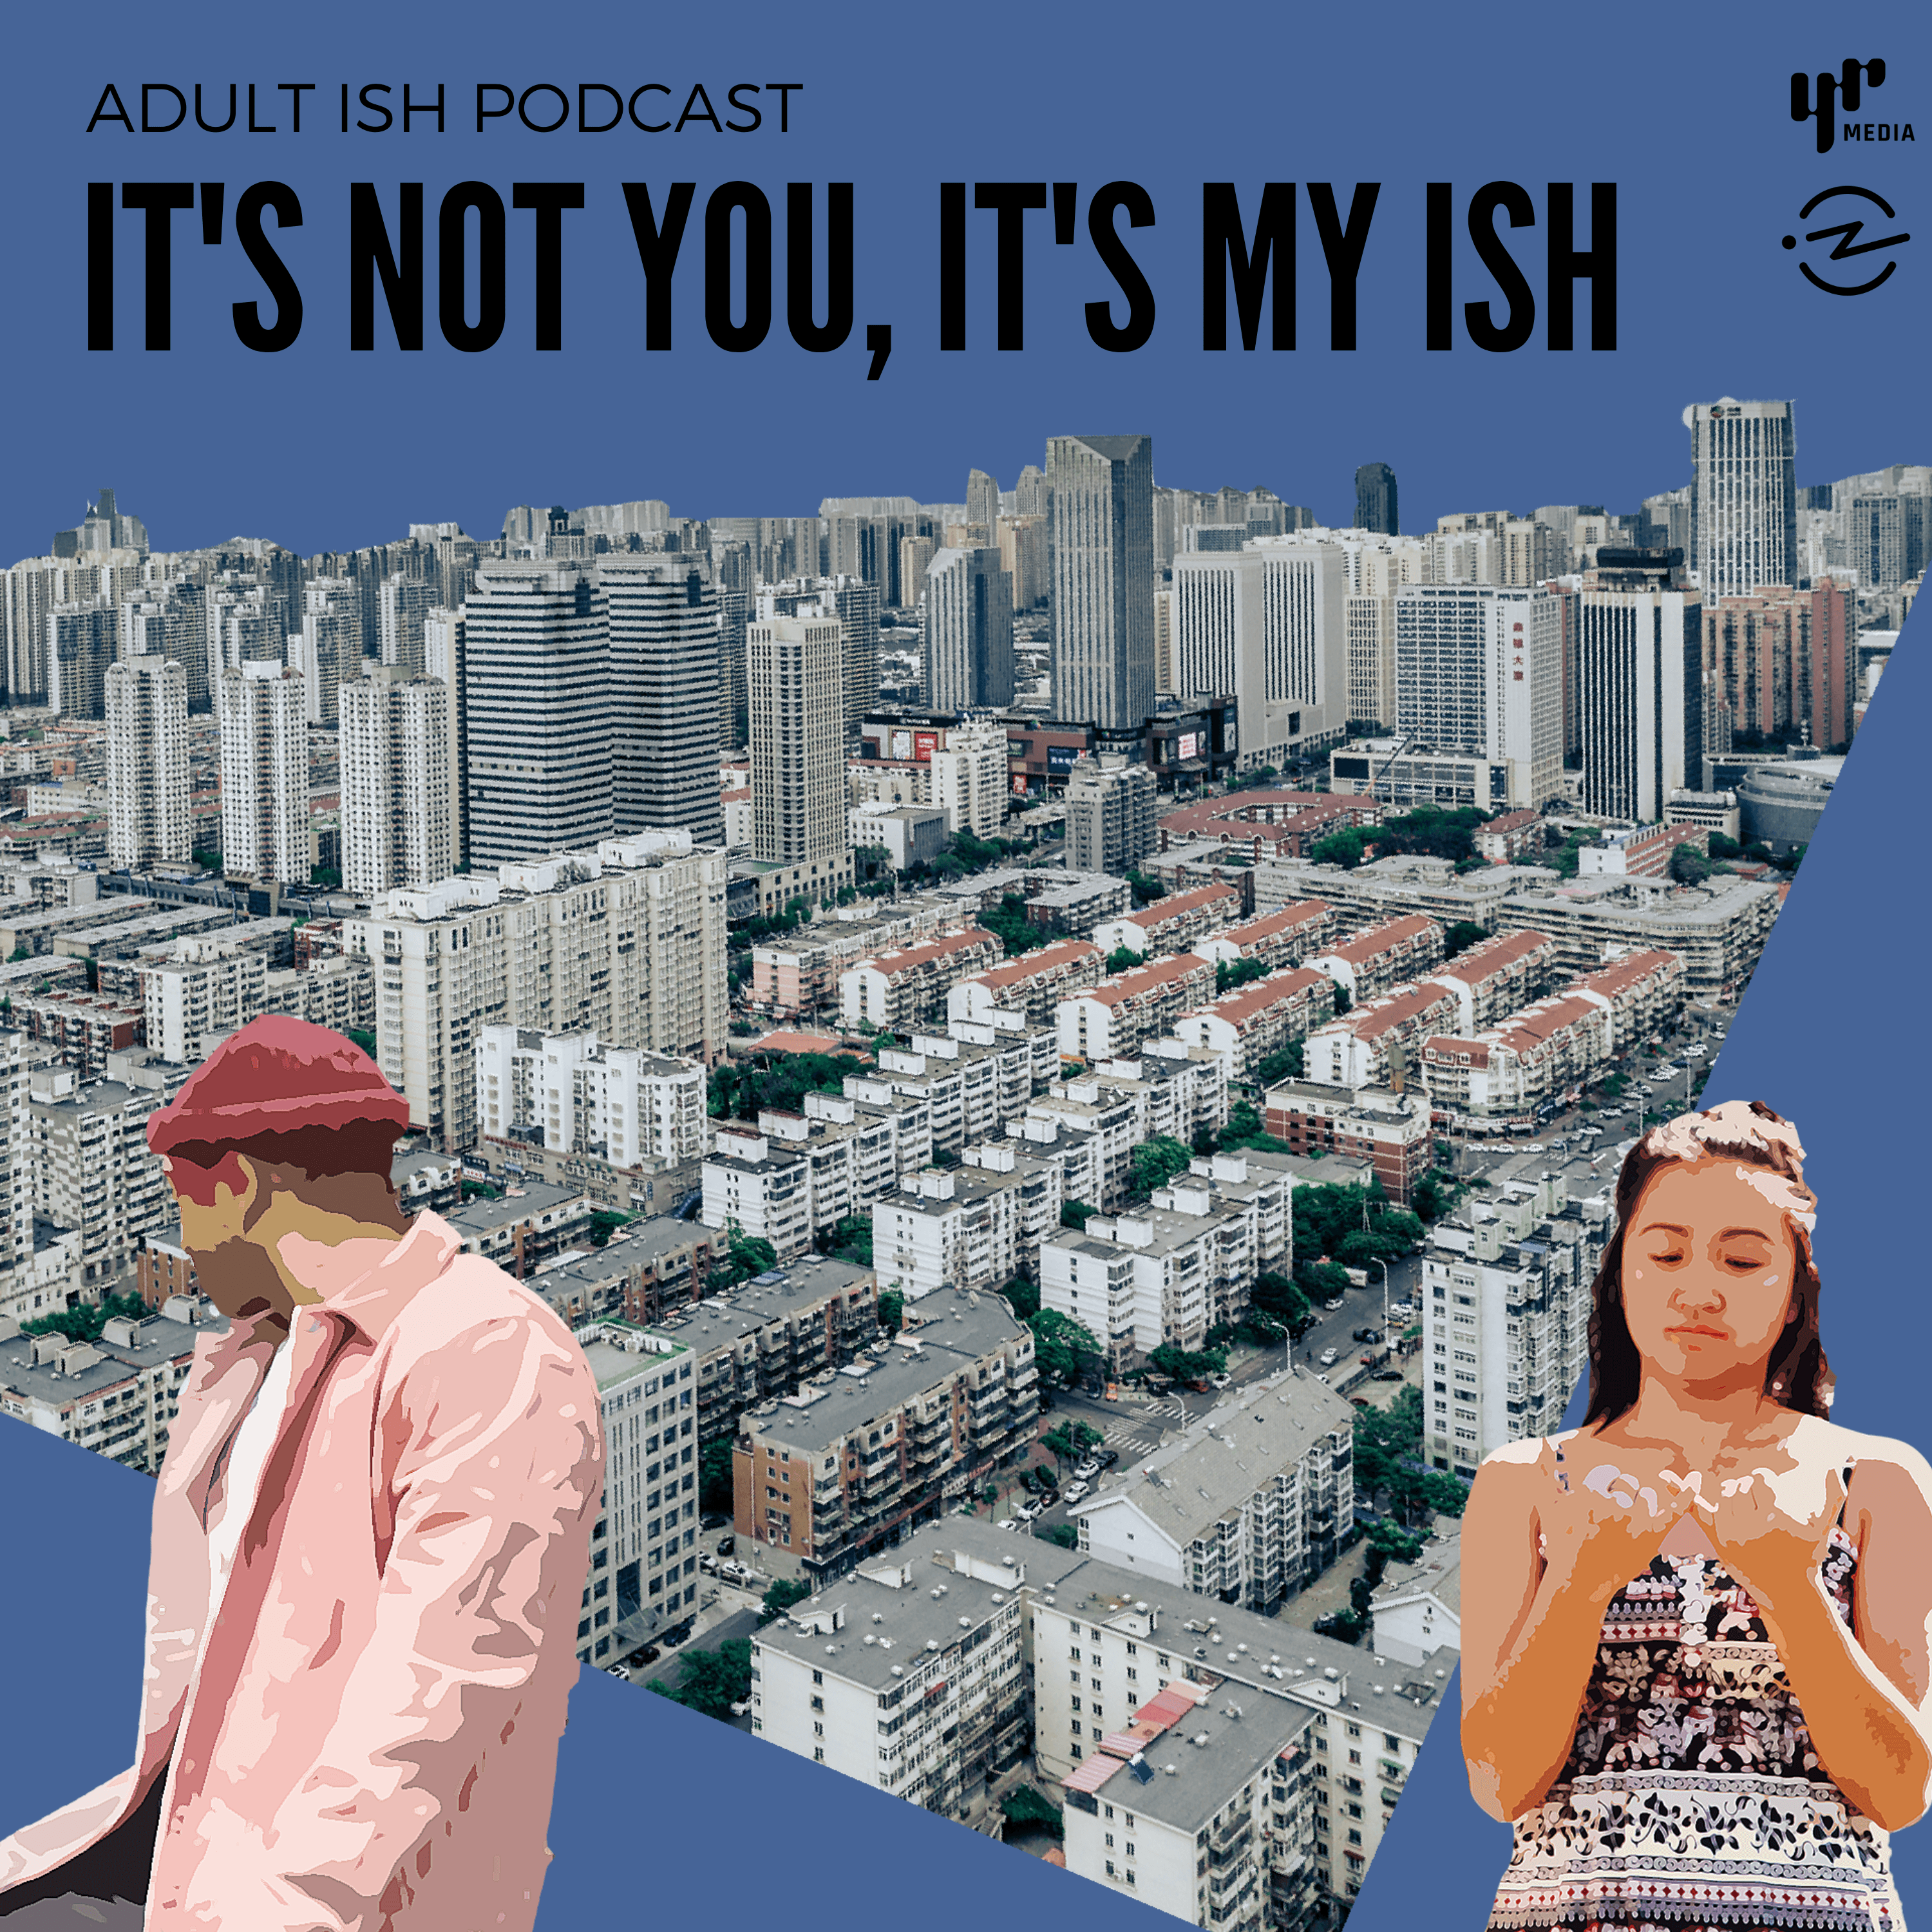 Thumbnail for "It’s Not You, It’s My ISH (ft. Dream Job and BFF Breakups)".